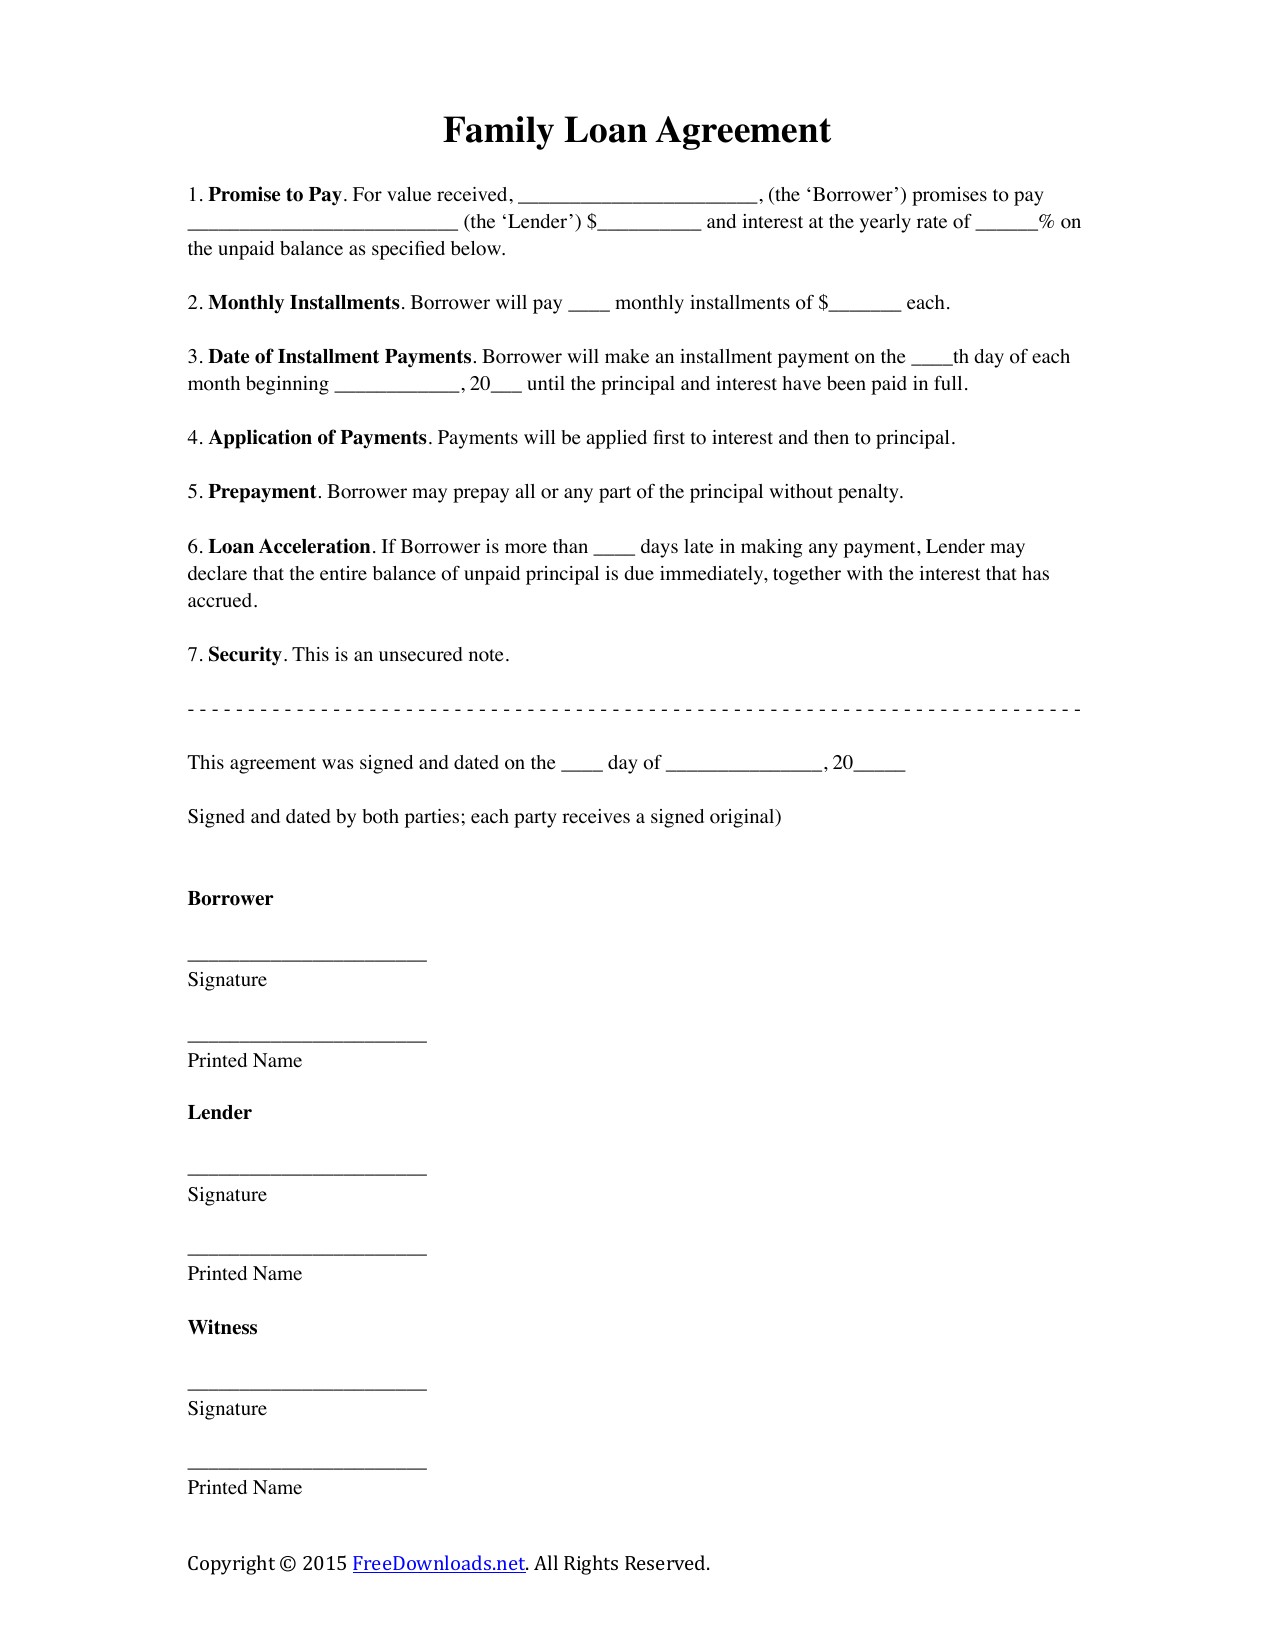 Download Family Loan Agreement Template PDF RTF Word Document Contracts